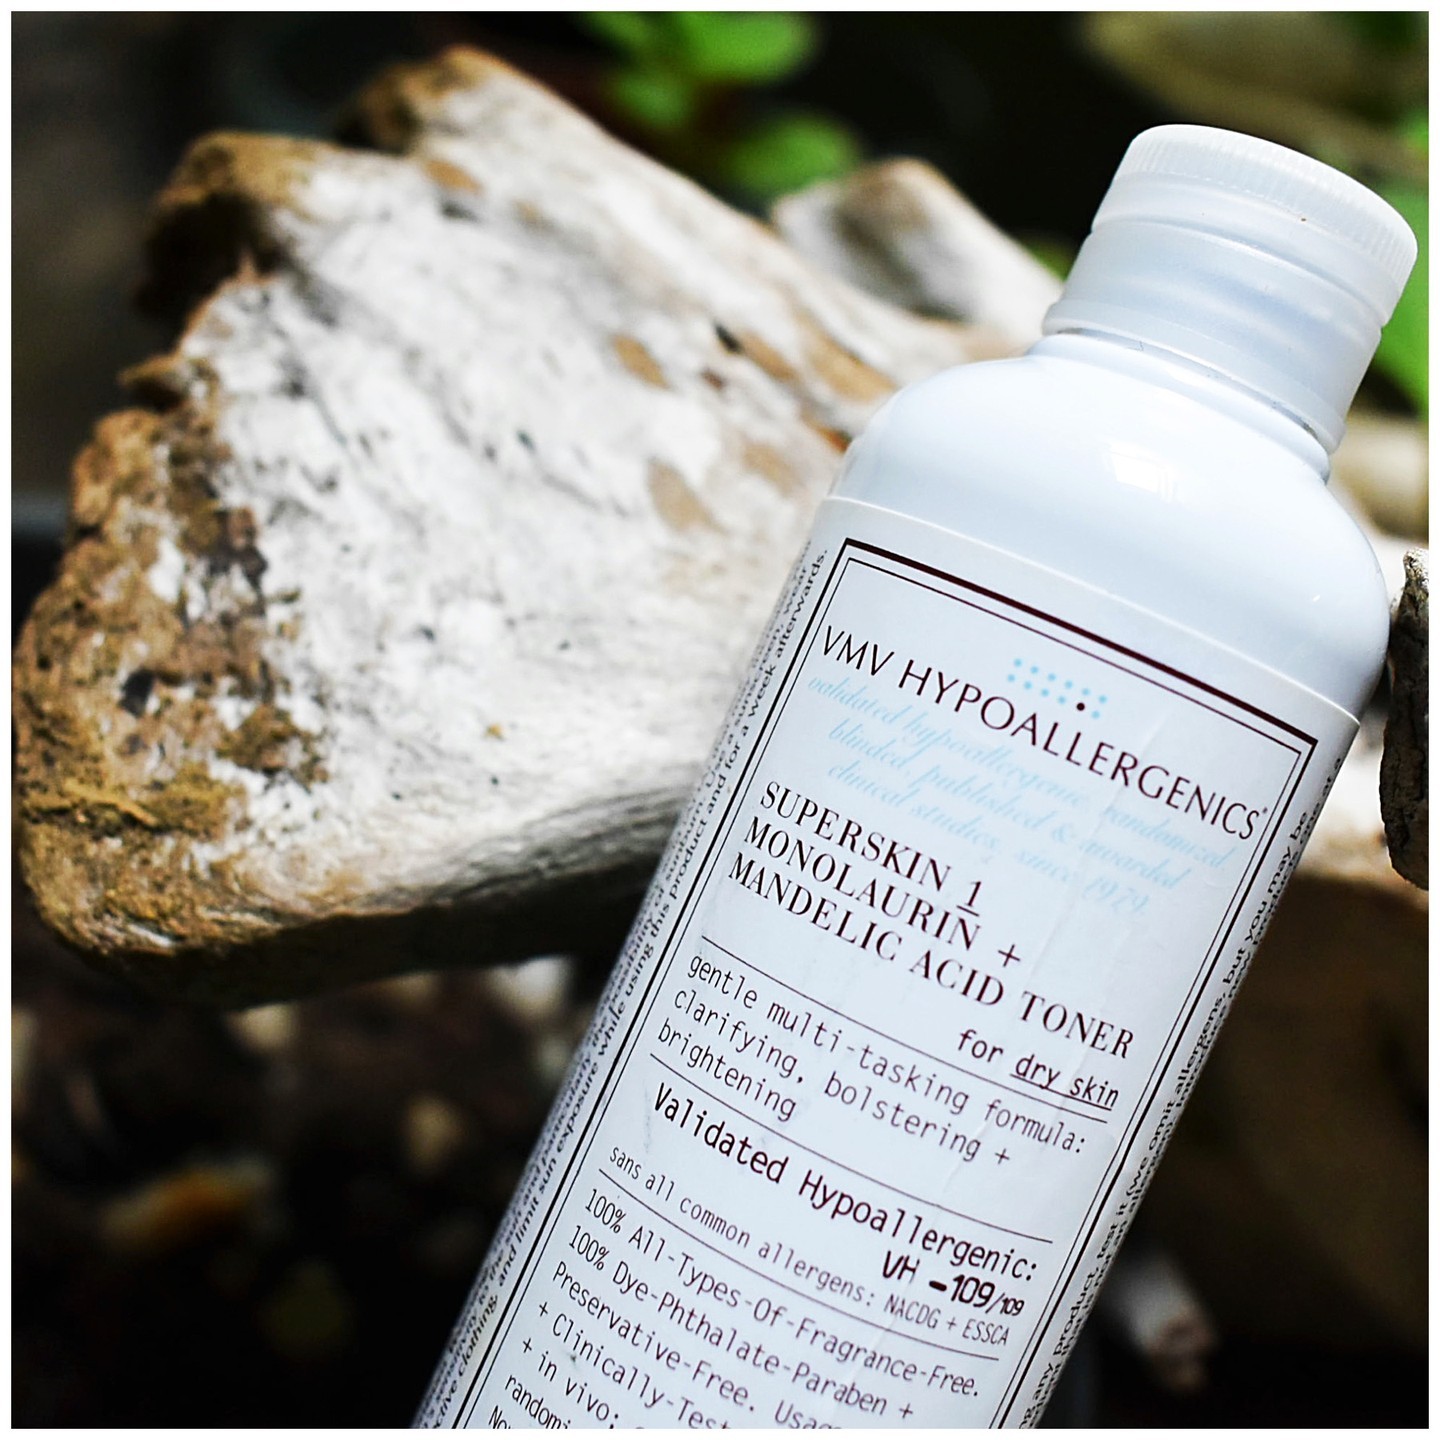 Monolaurin is a multitasking marvel but so is mandelic acid! #MultitaskingMonday #skinstrumental 

Derived from almonds, mandelic acid is excellent at addressing …
🕰 Photo-aging (wrinkles, loss of elasticity),
🔴 Acne, and
🦒 Dark spots.

It’s also far less irritating than many other effective actives out there.

Mandelic acid (present with monolaurin in Superskin Toners) has a larger molecular size which makes it penetrate the skin less, but more evenly, performing excellently as a keratolytic.

Allergic to tree nuts? Unless you’ve also patch tested positive to almonds you should still be able to use mandelic acid. Food and skin allergies do not frequently correlate. A prick test or blood test is specific to food. Make sure to get a patch test to confirm your skin allergies.

#hypoallergenic #mandelicacid #skincare #SavingTheWorldsSkin